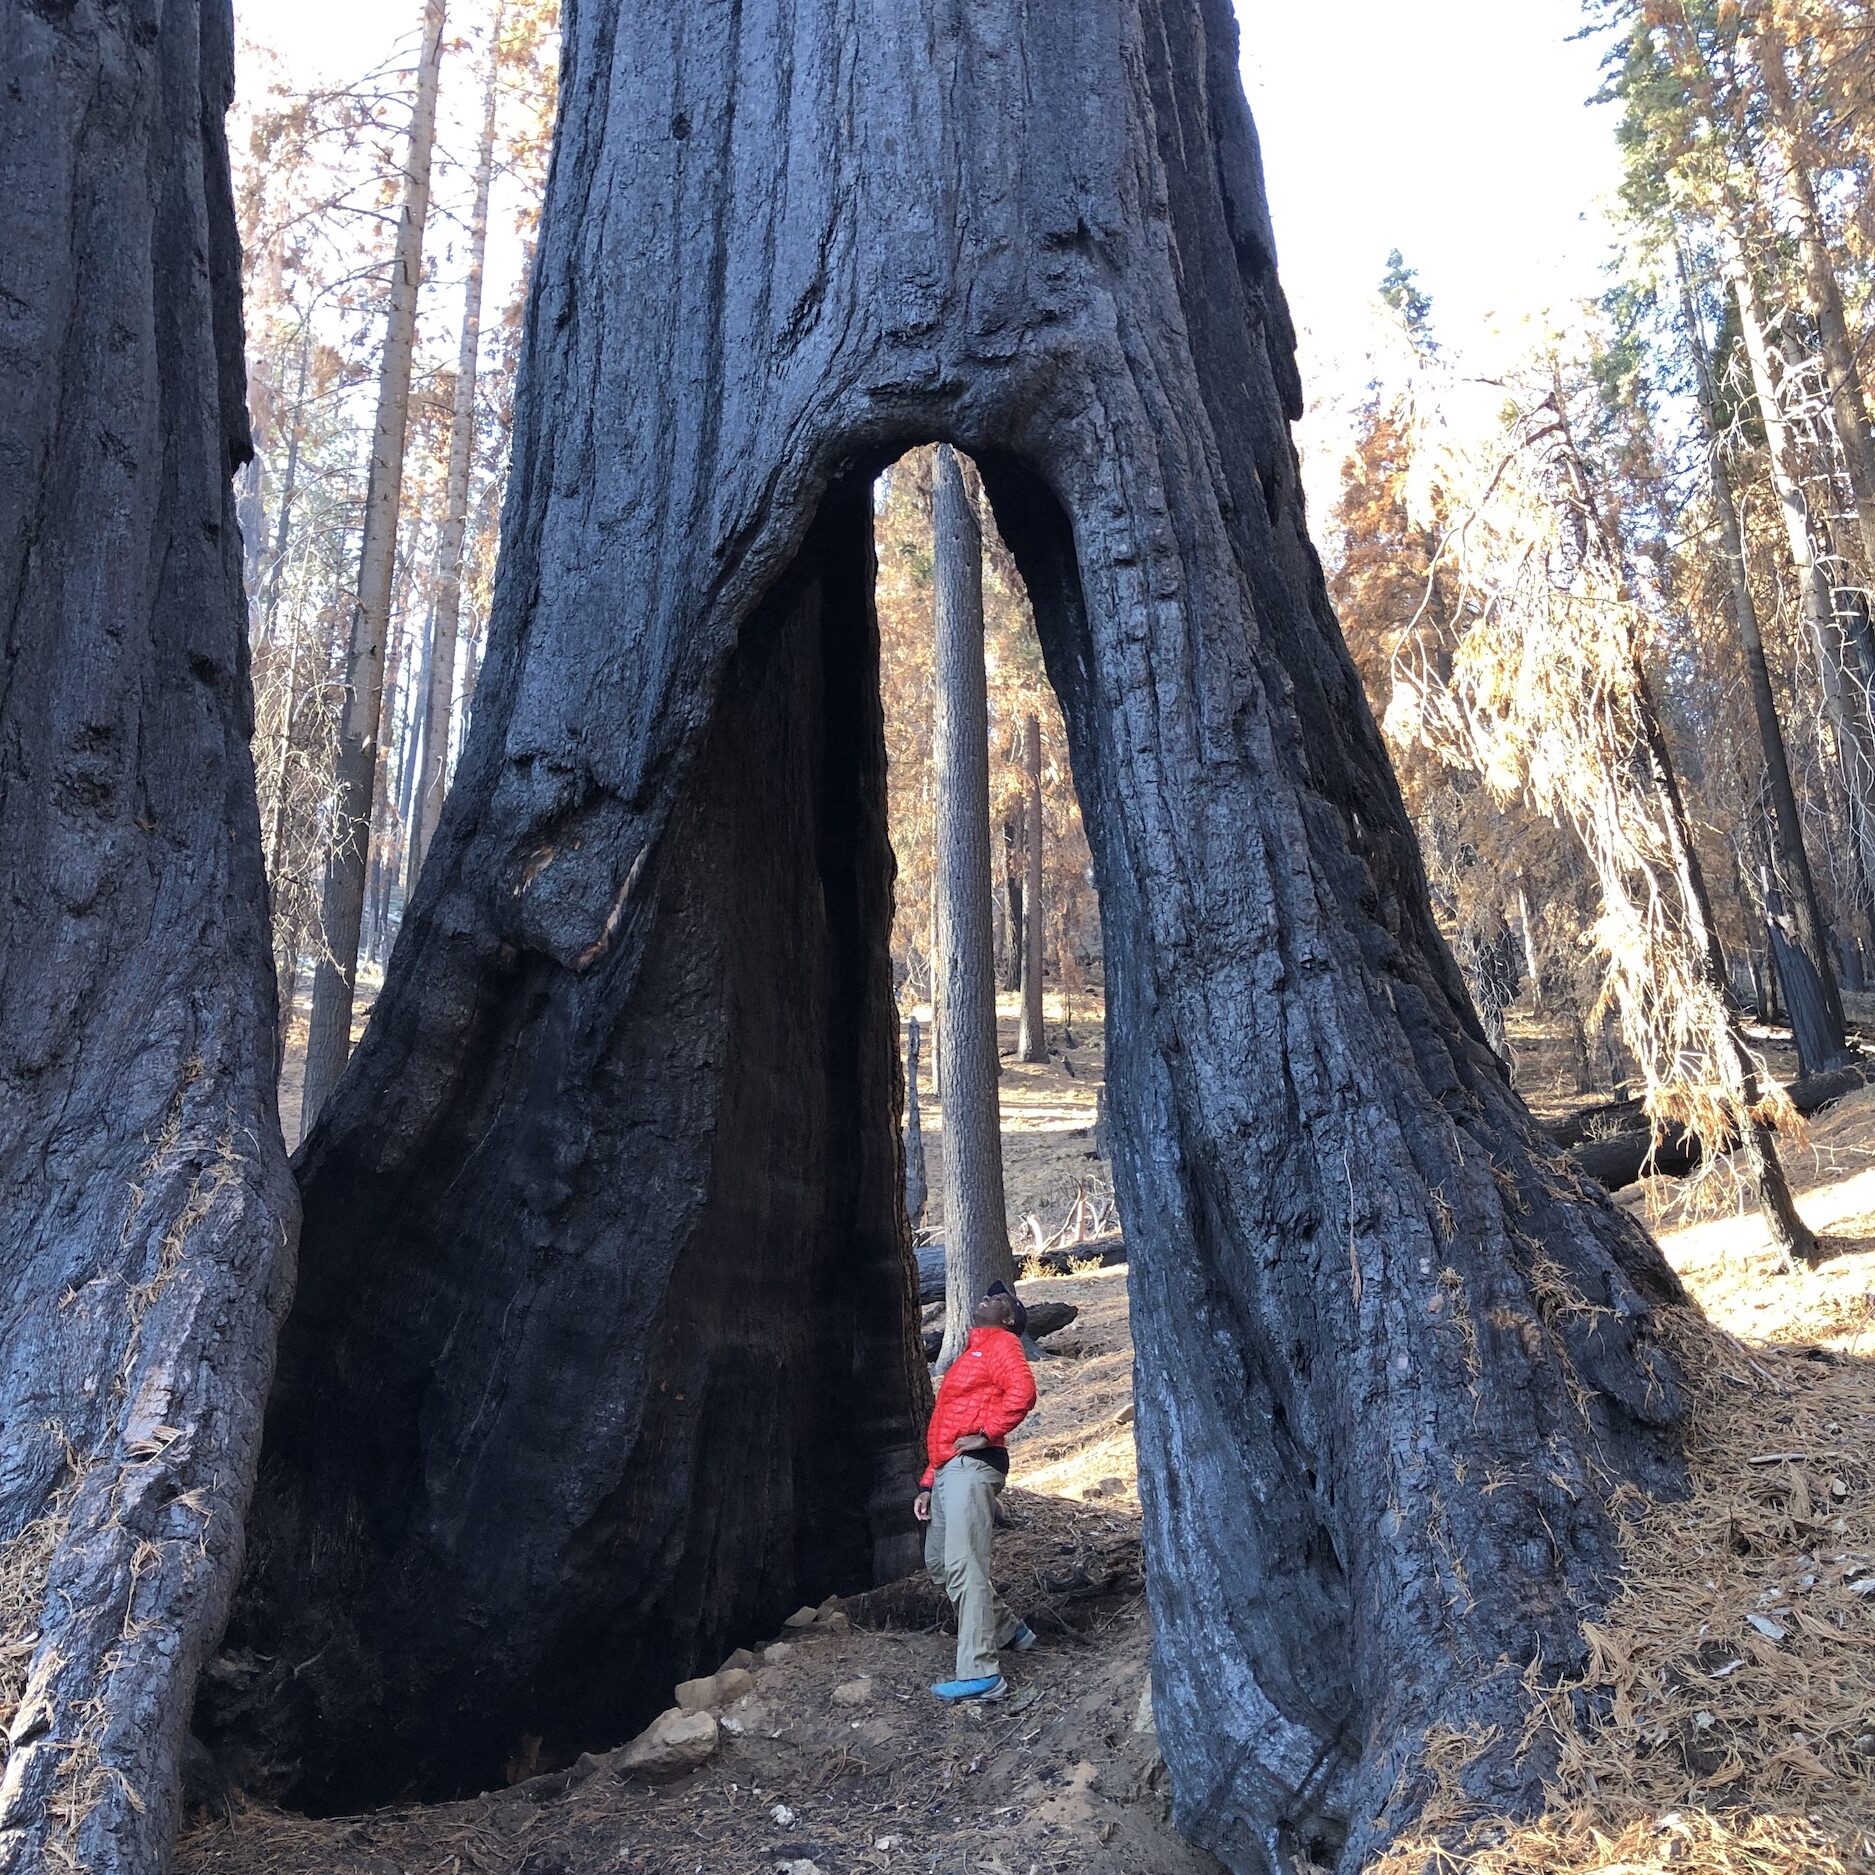 Research team member, Dr. Michael Dorsey, in a hollow created by numerous wildfires over centuries in a mature giant sequoia.